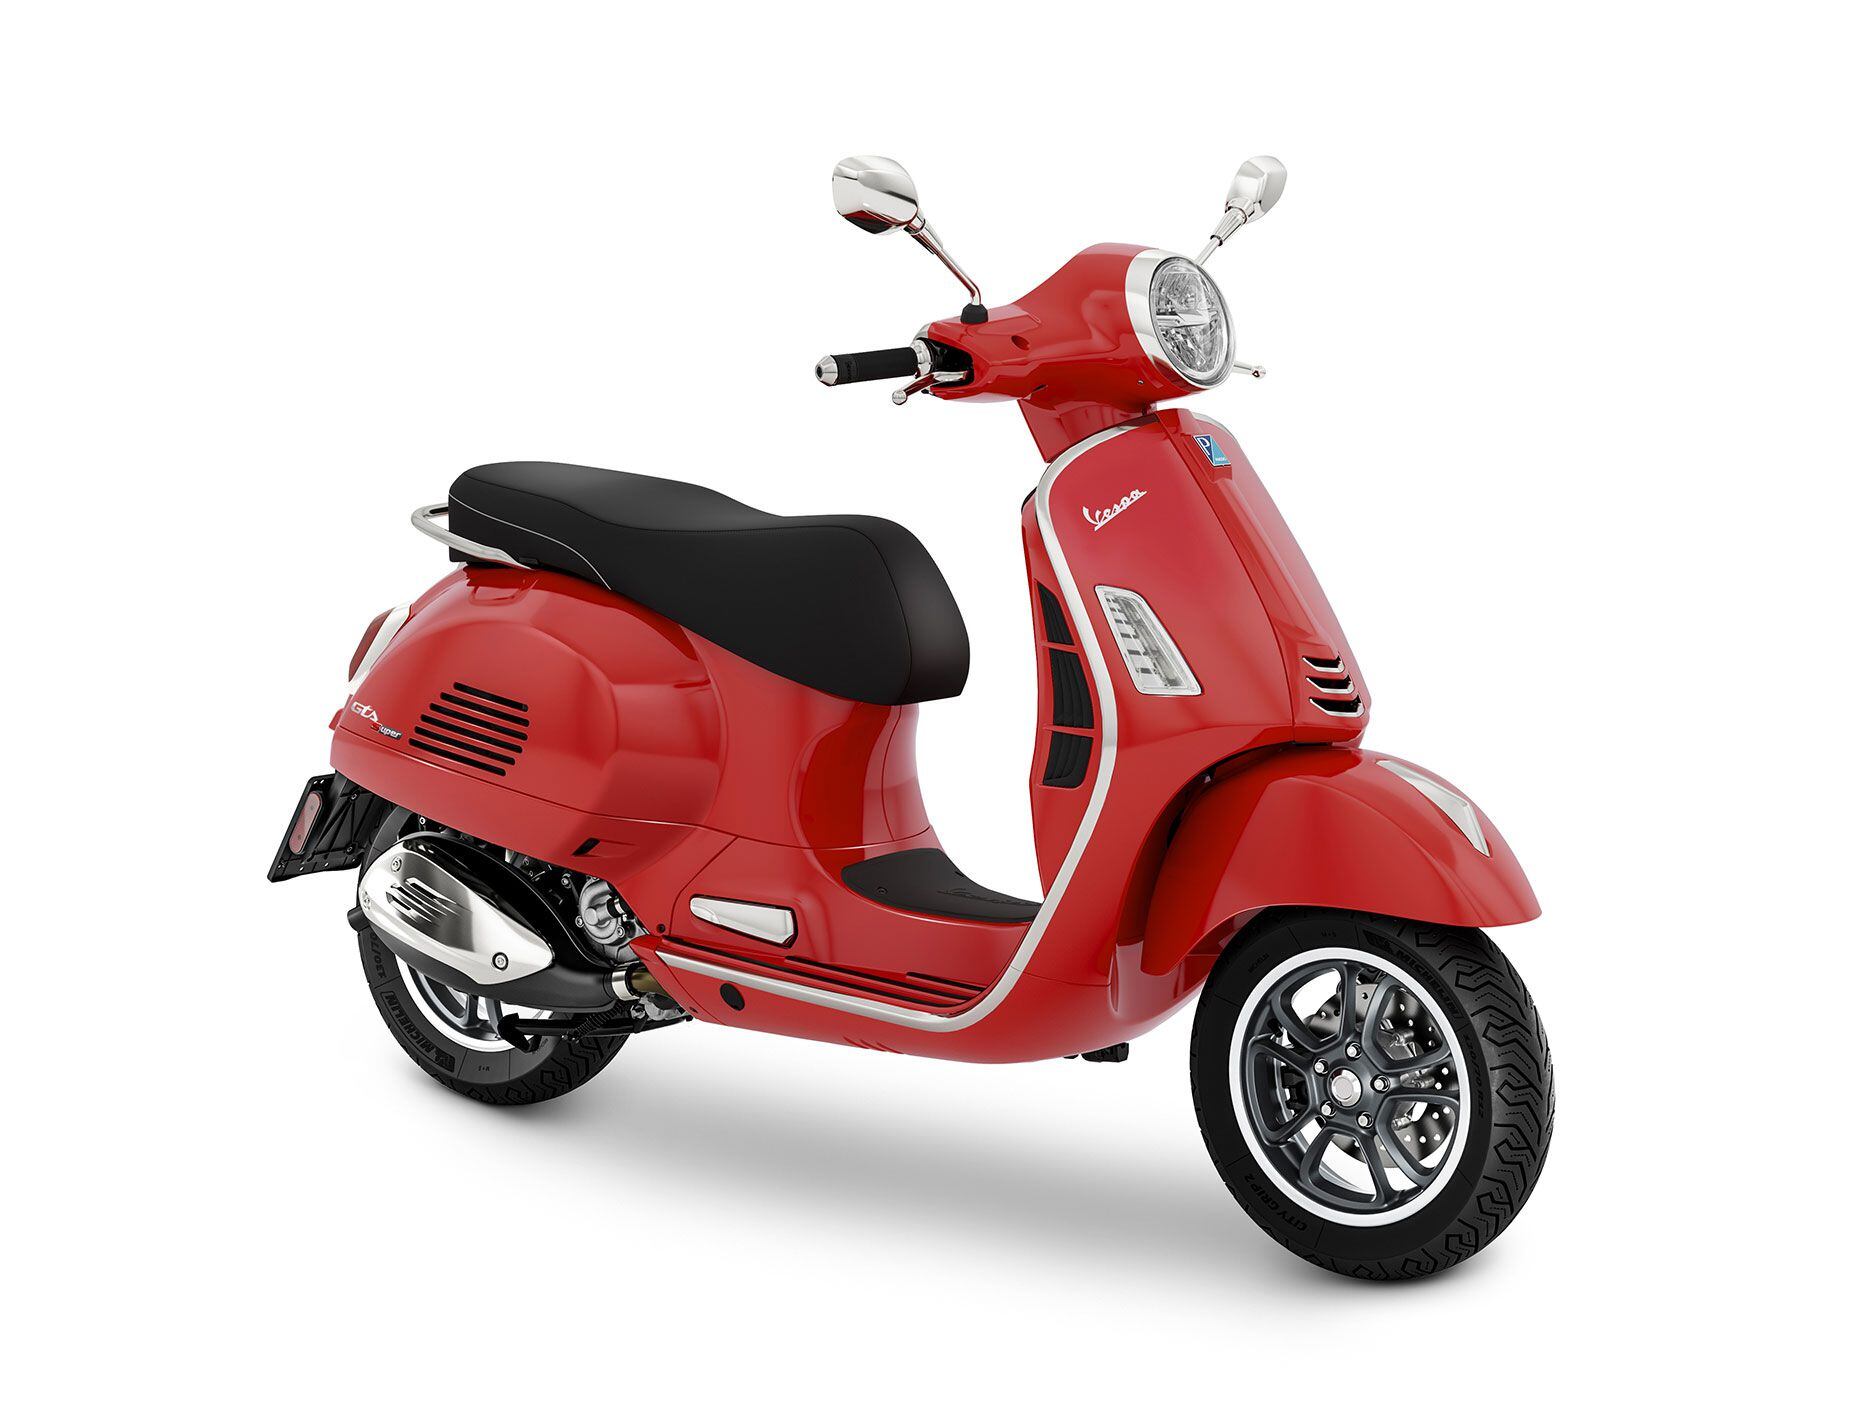 The GTS is the musclebike of the Vespa line, with a 300-class engine, solid styling, a wide powerband, and respectable performance. (Shown here is the GTS Super.)